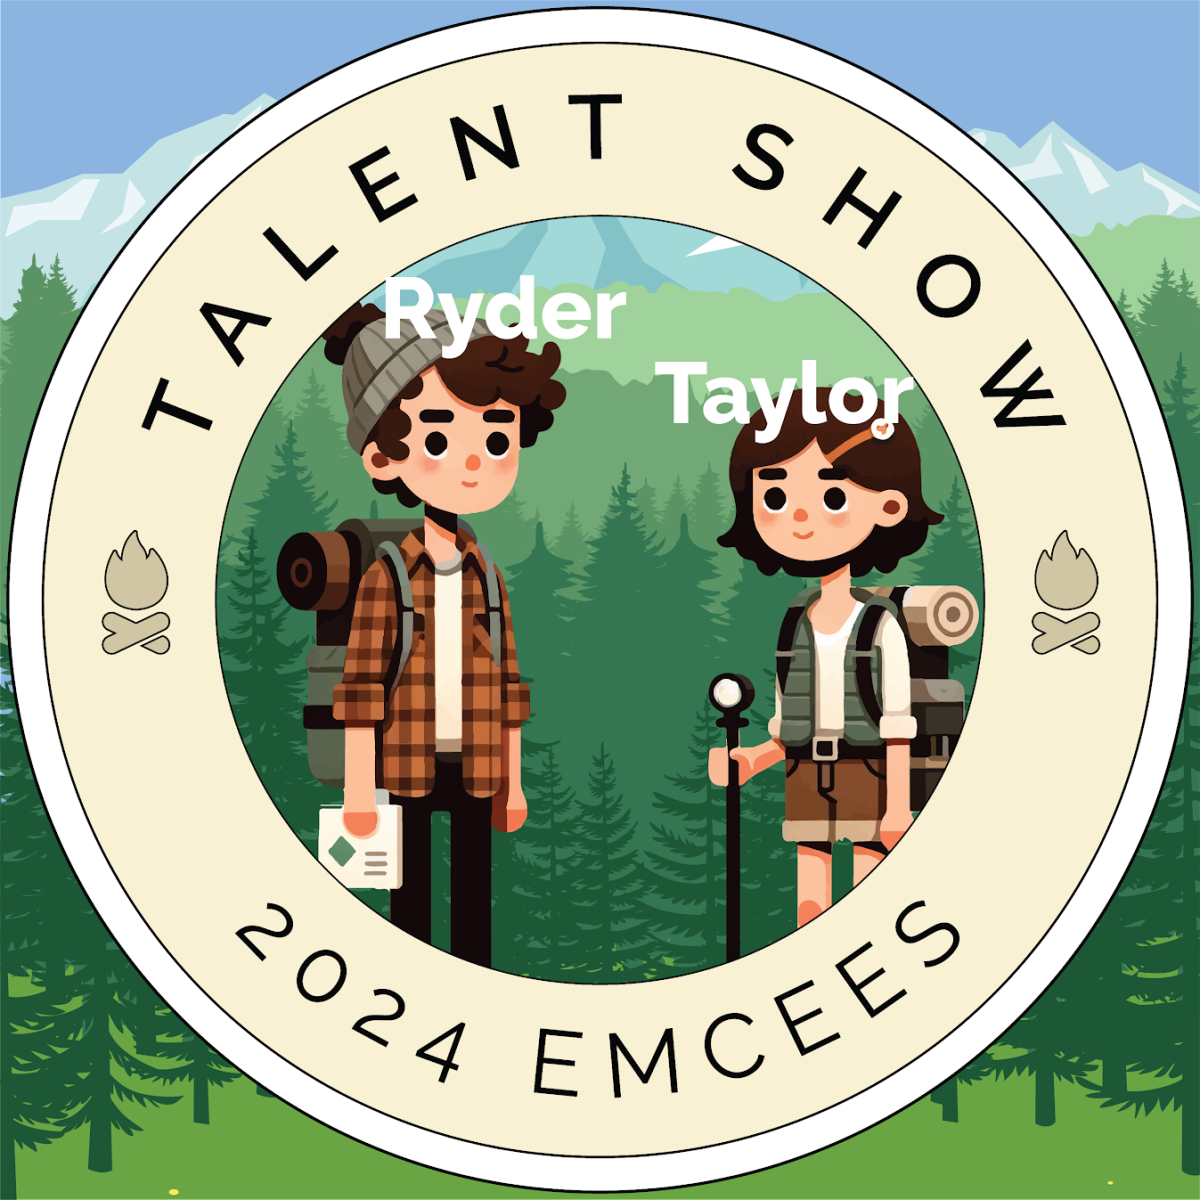 Meet Our Camp Talent Show Wilderness Leaders: Ryder Gamrath and Taylor Ross